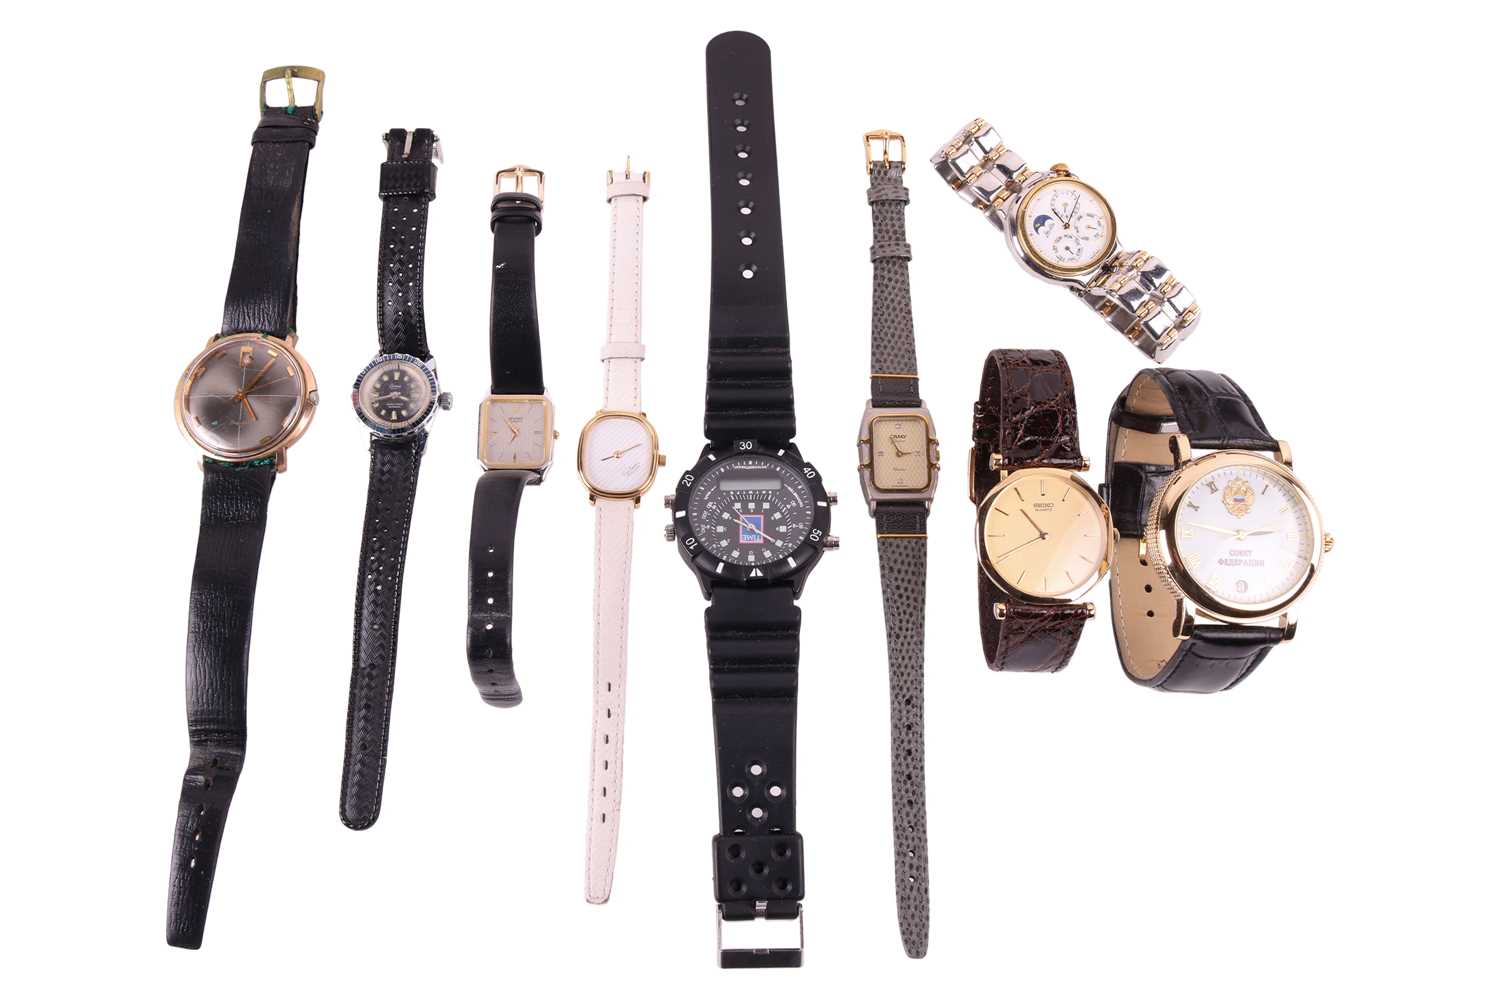 A collection of nine wristwatches, featuring a,Romanel Datostan with a 37mm and hand-wound movement.